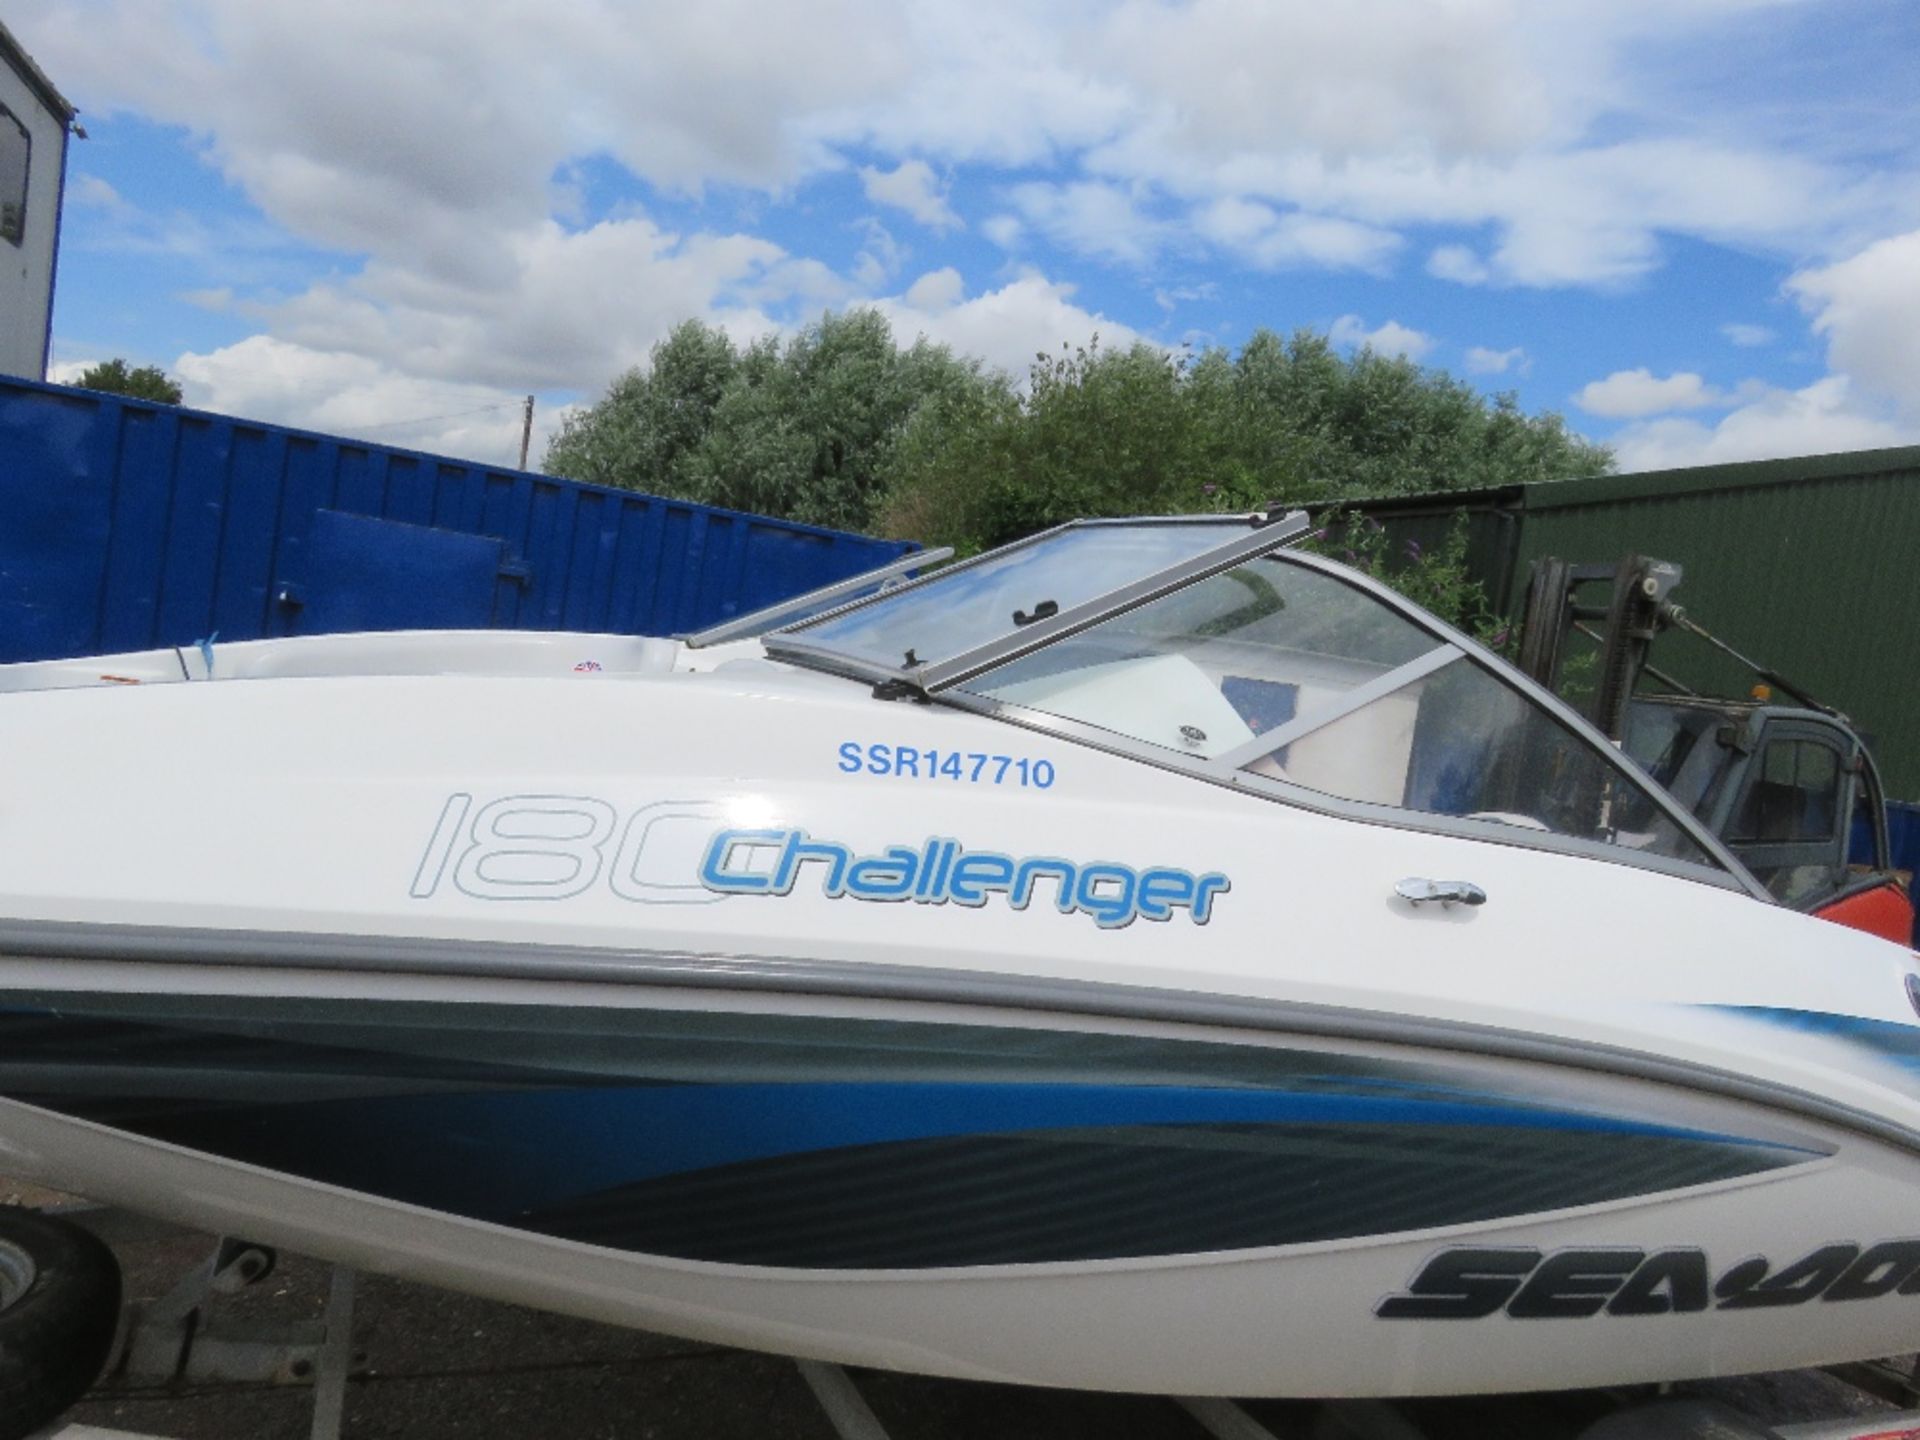 ON SALE!!!...SEADOO CHALLENGER 180 JET BOAT ON TRAILER. POWERED BY ROTAX 215HP 4-TEC ENGINE - Image 4 of 23